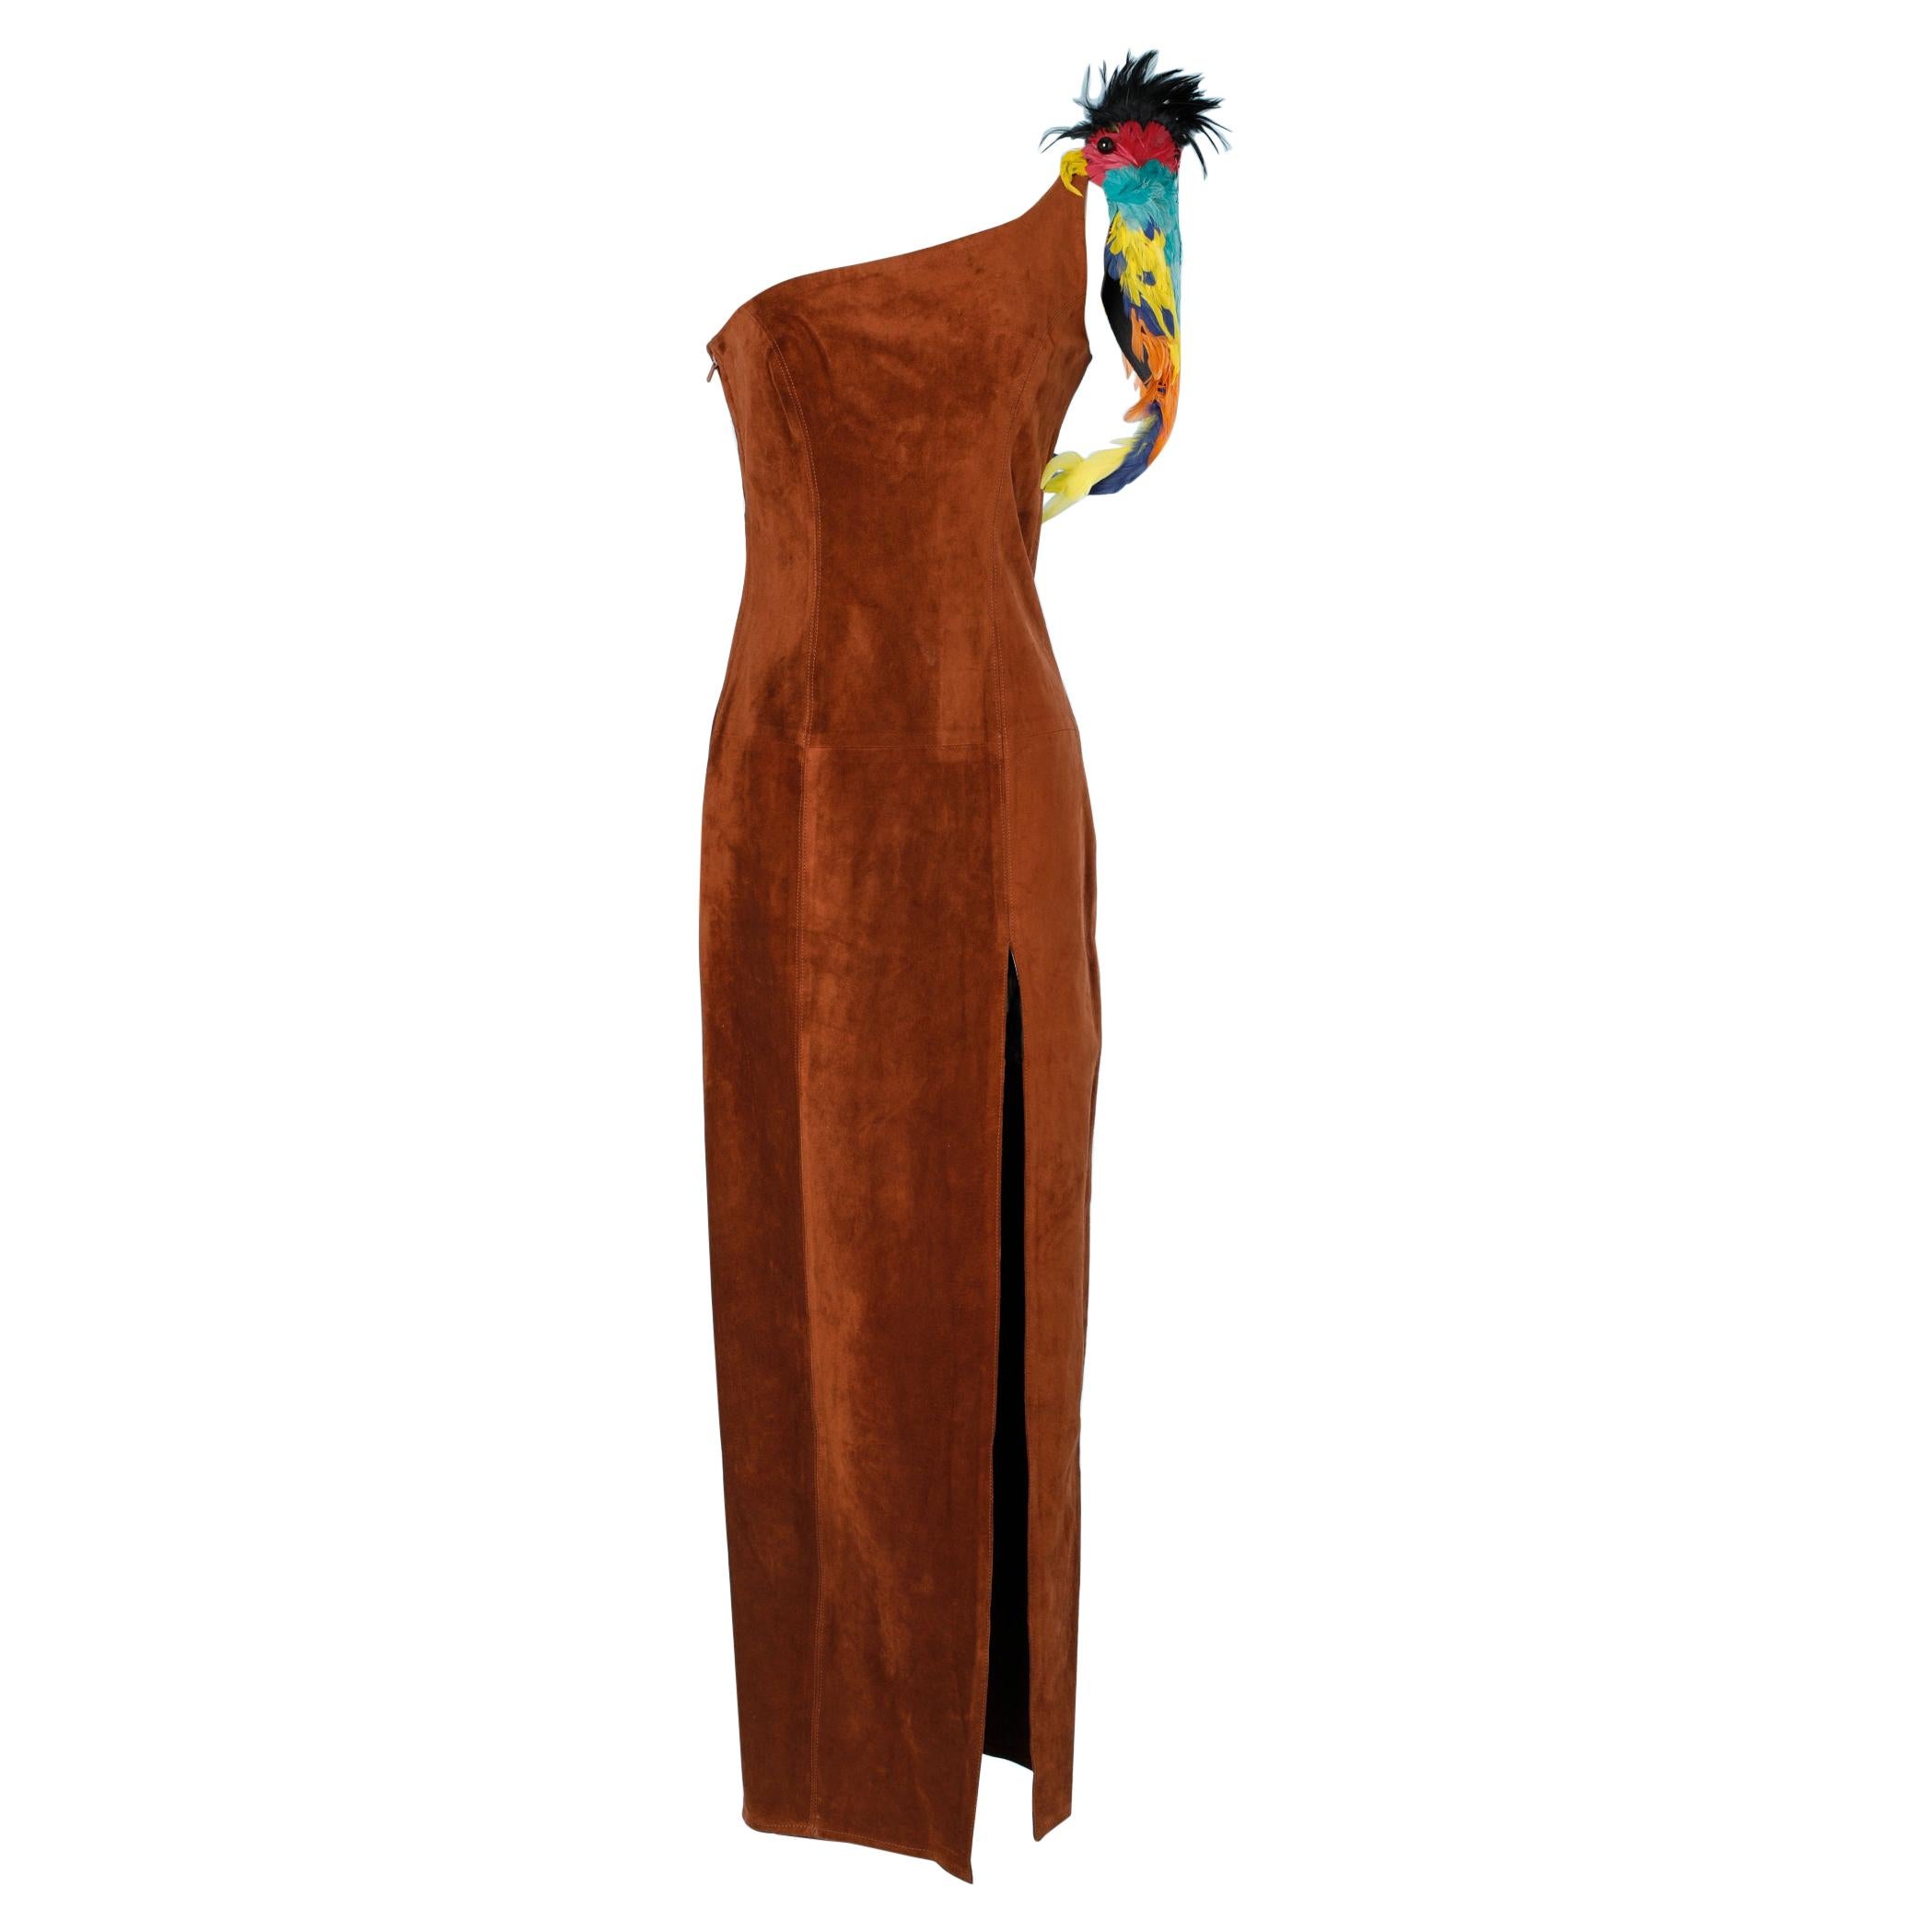 Parrots brown suede asymetrical dress S.S 1992 Chantal Thomass 